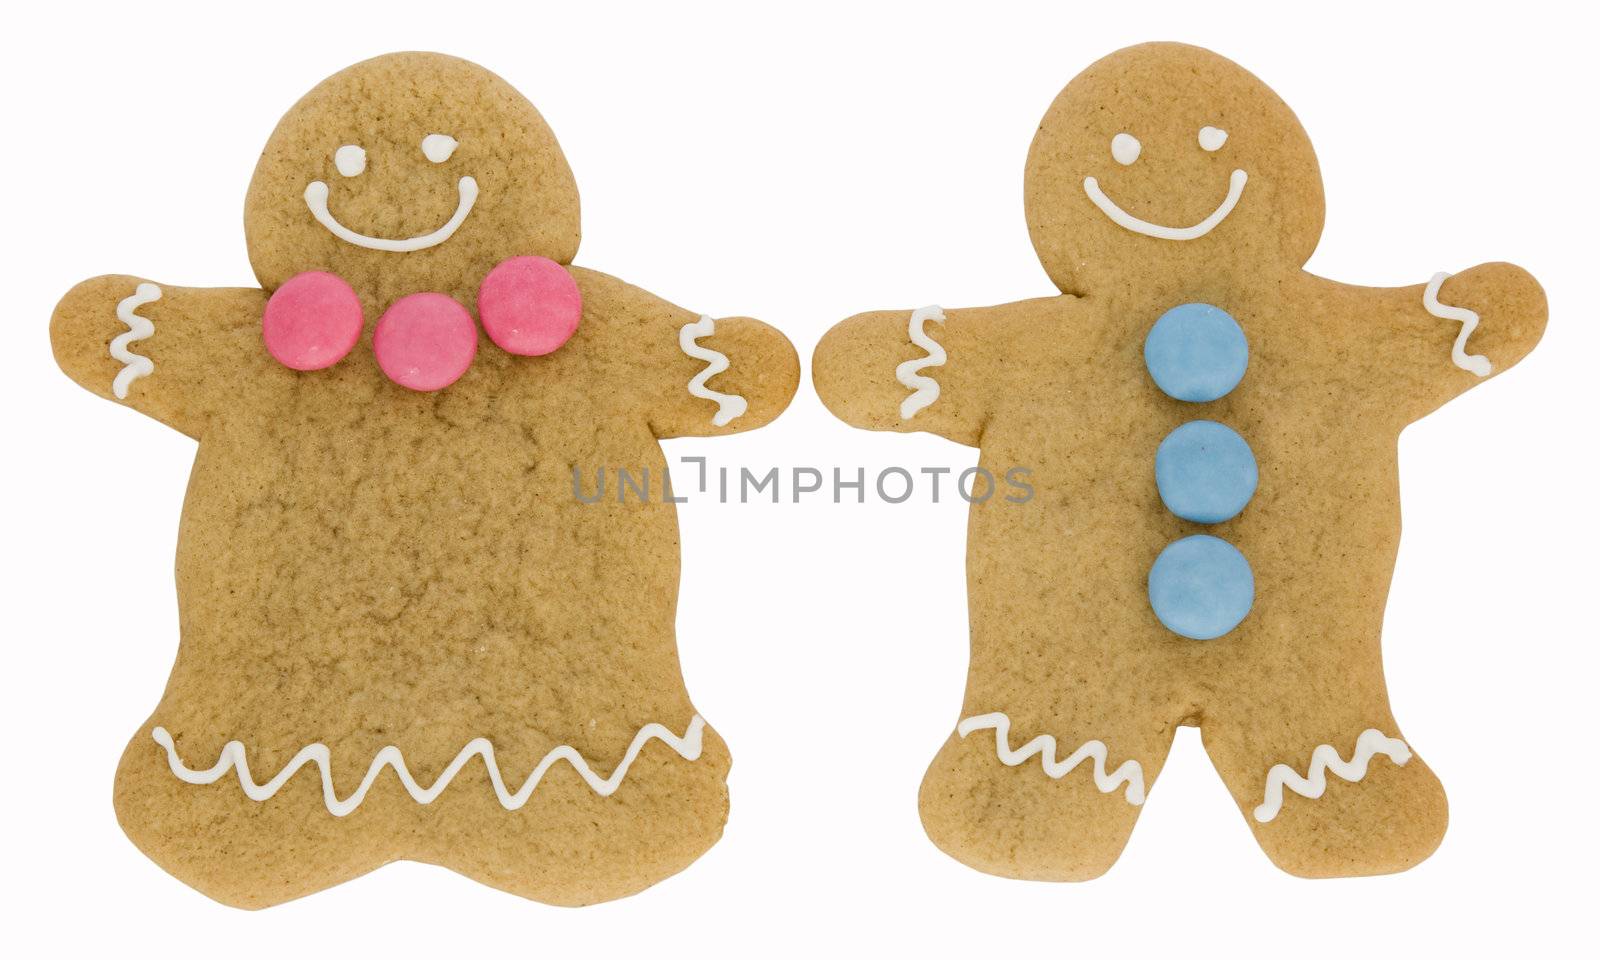 Gingerbread man and woman isolated against white